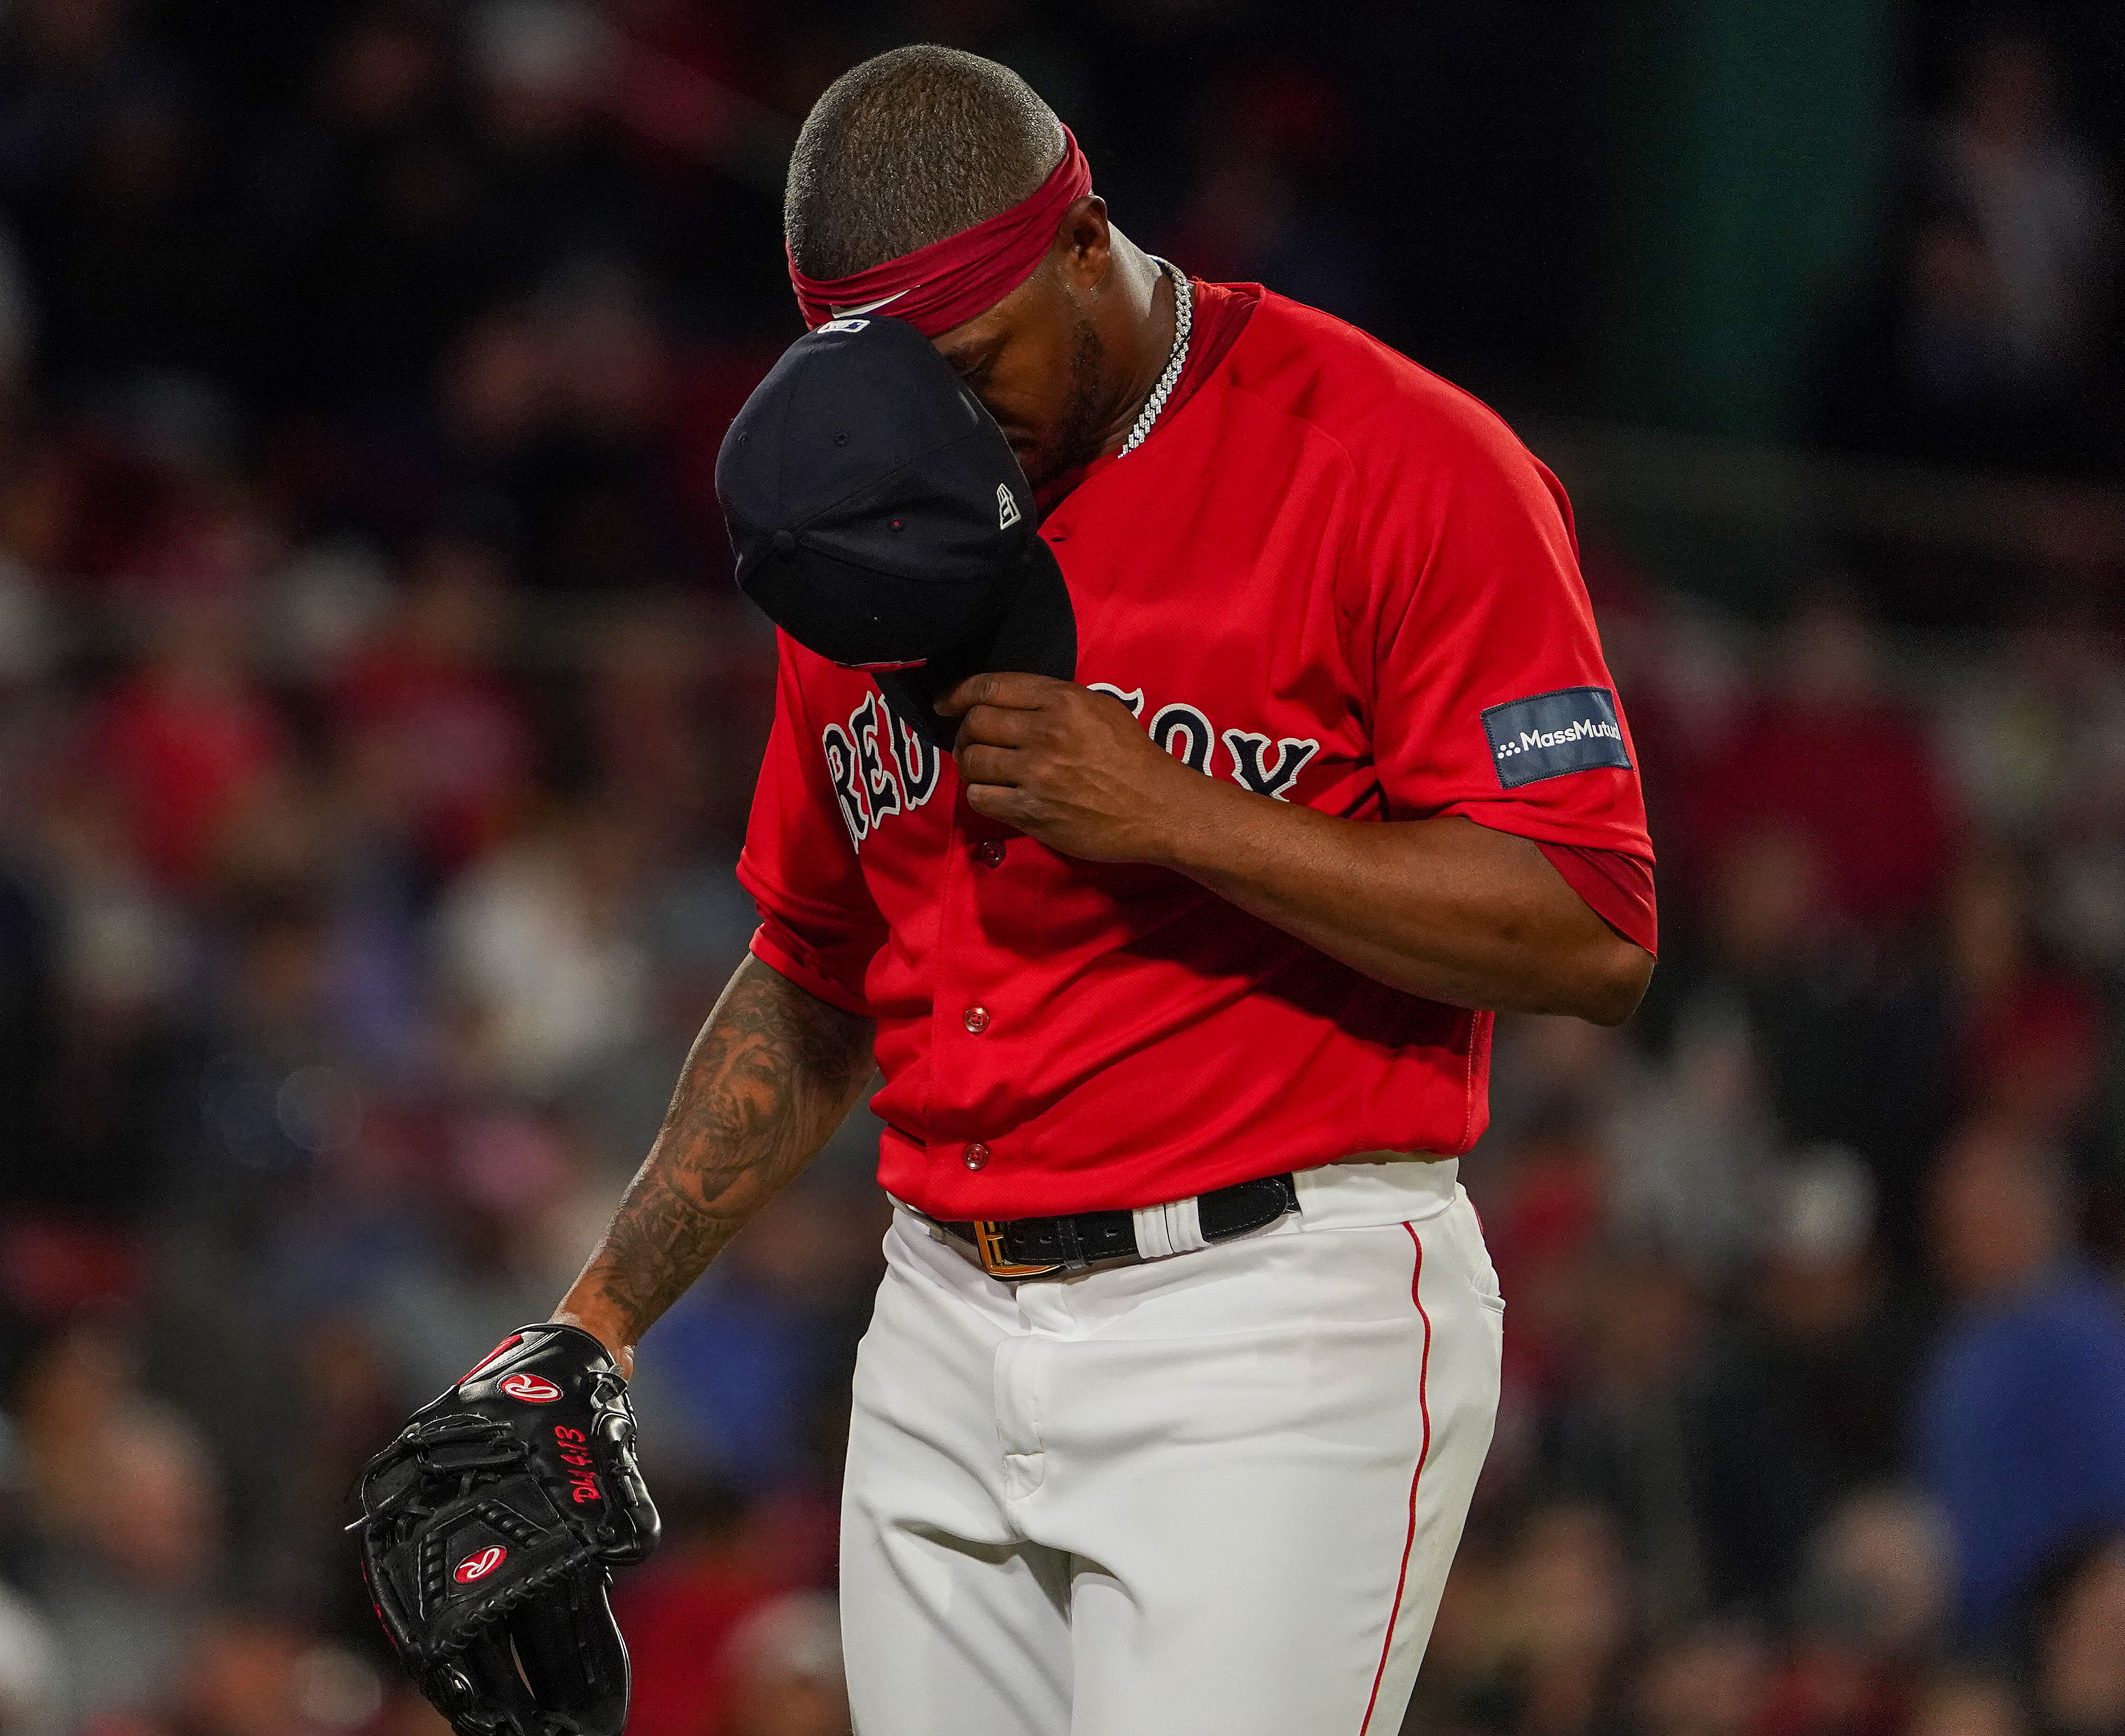 Red Sox reliever Rodríguez could be done for the season with